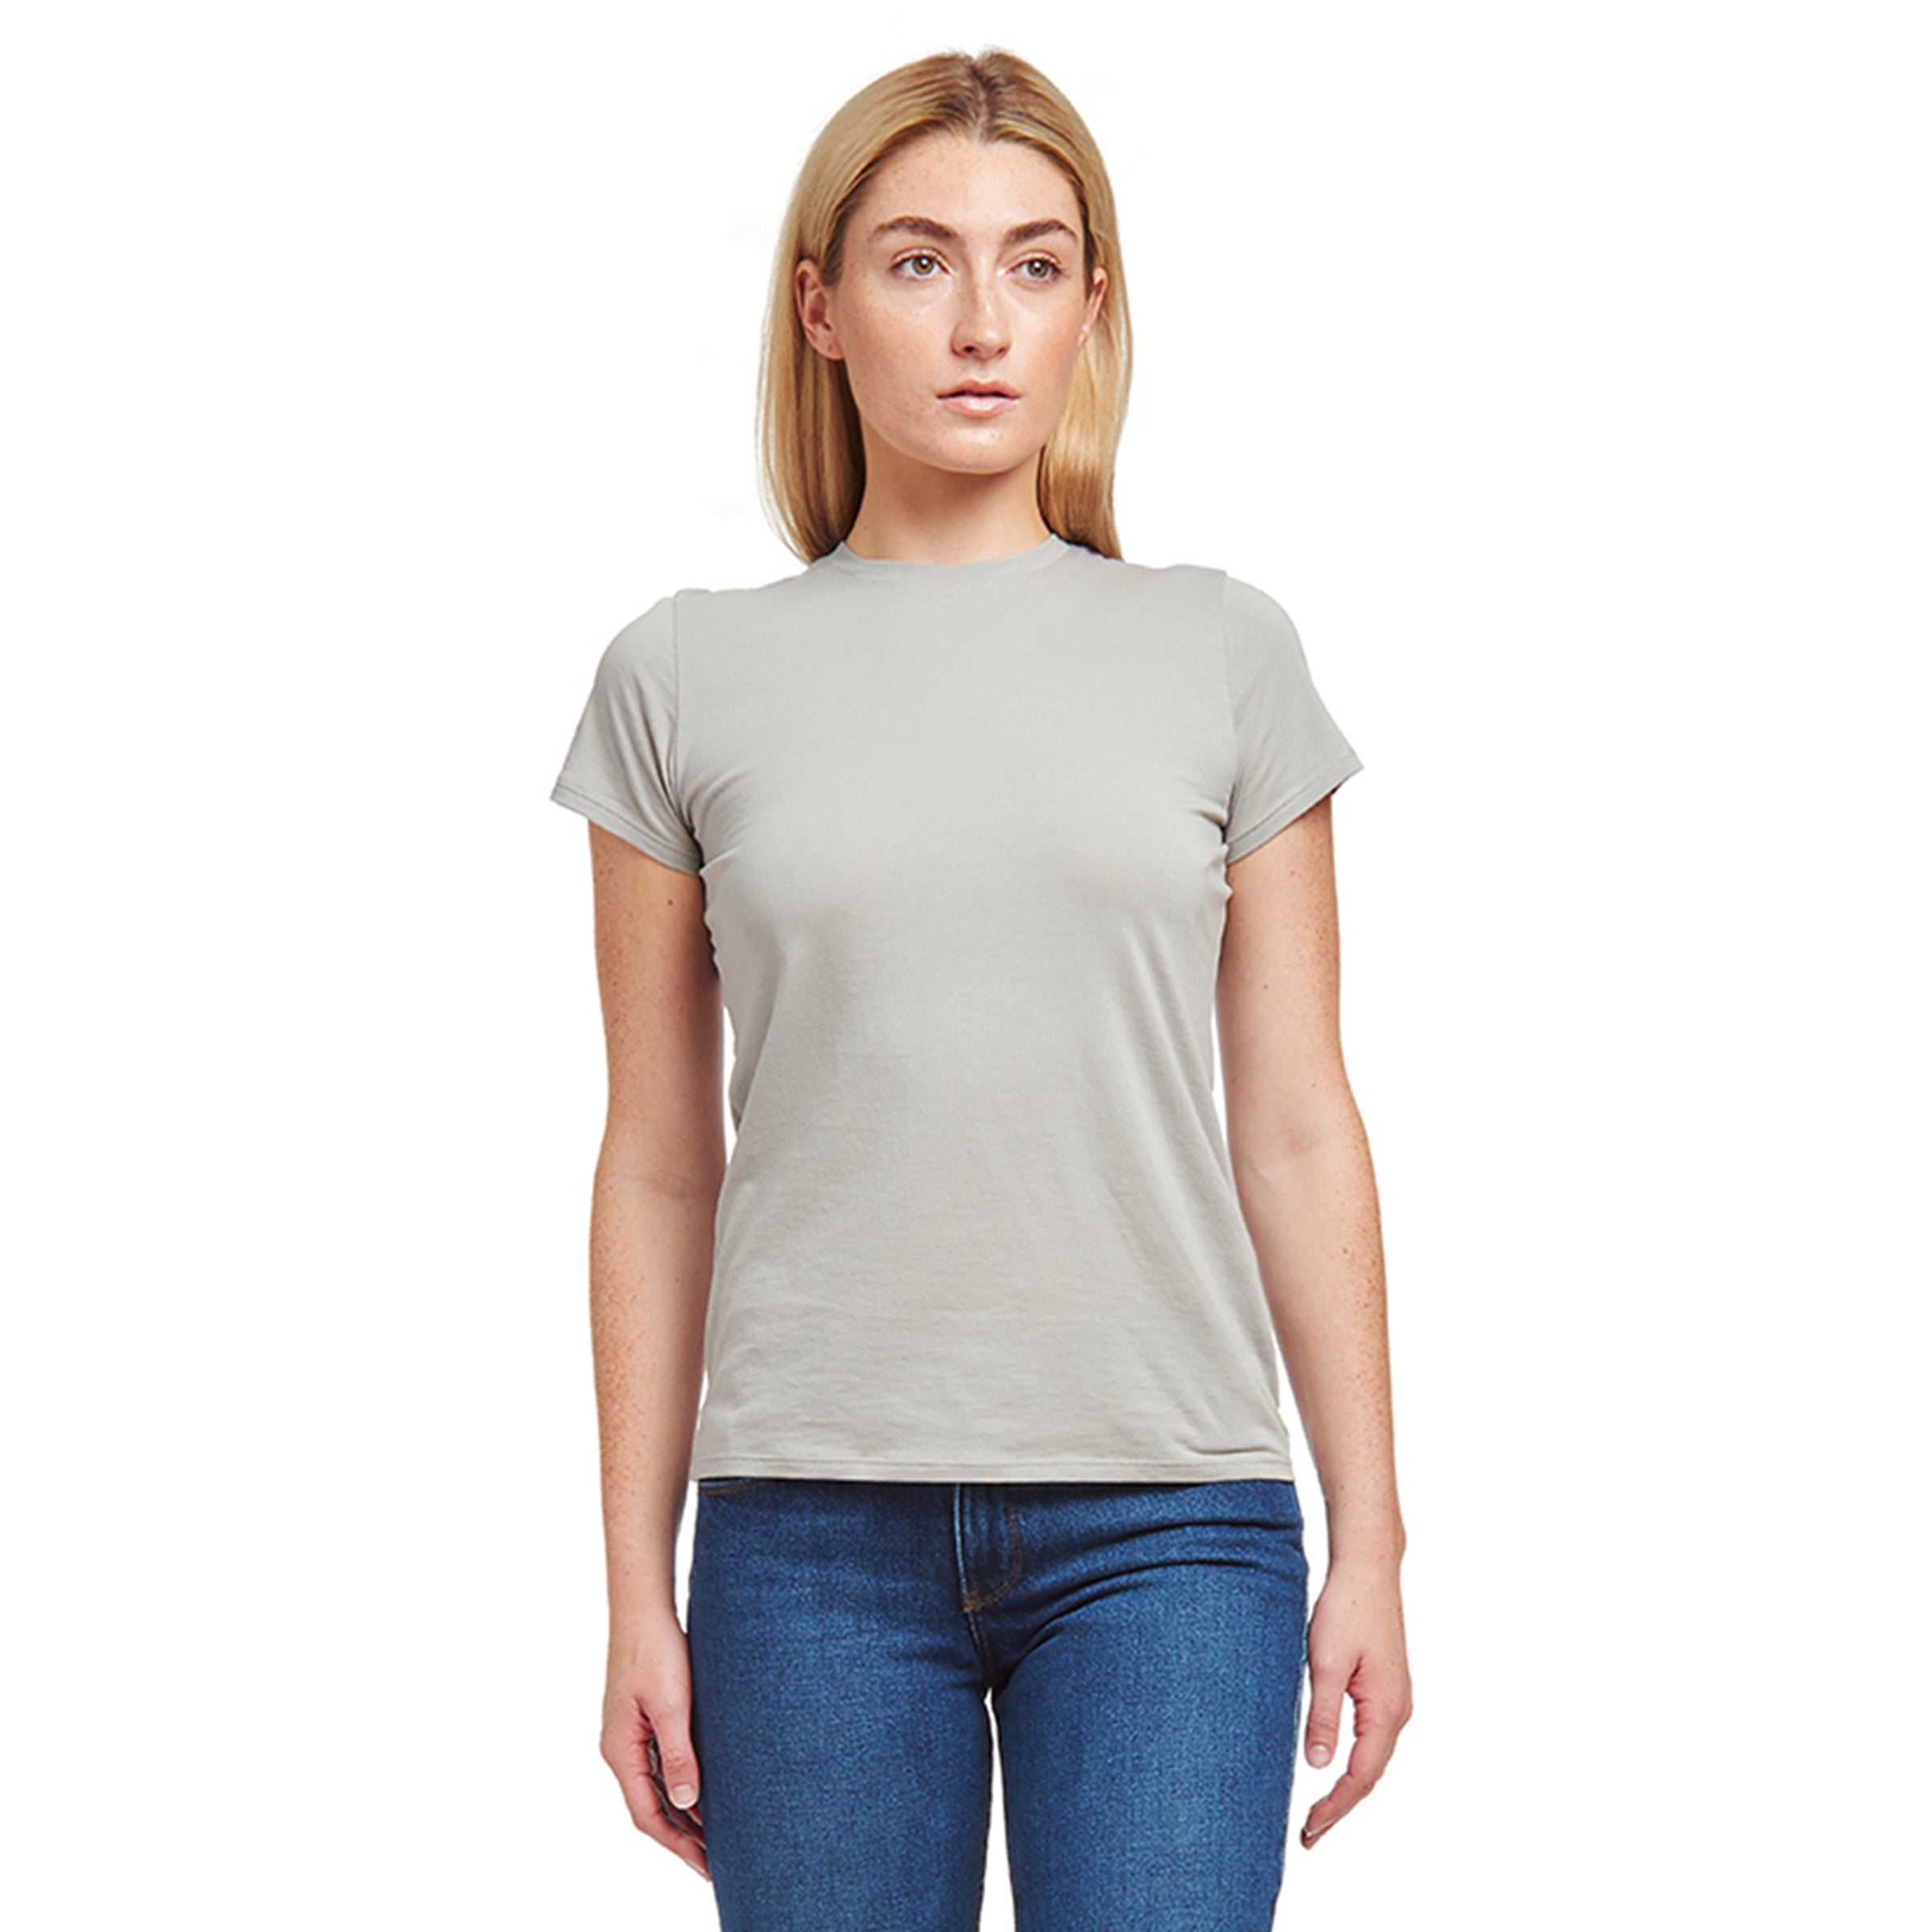 Women wearing Light Gray Fitted Crew Marcy Tee